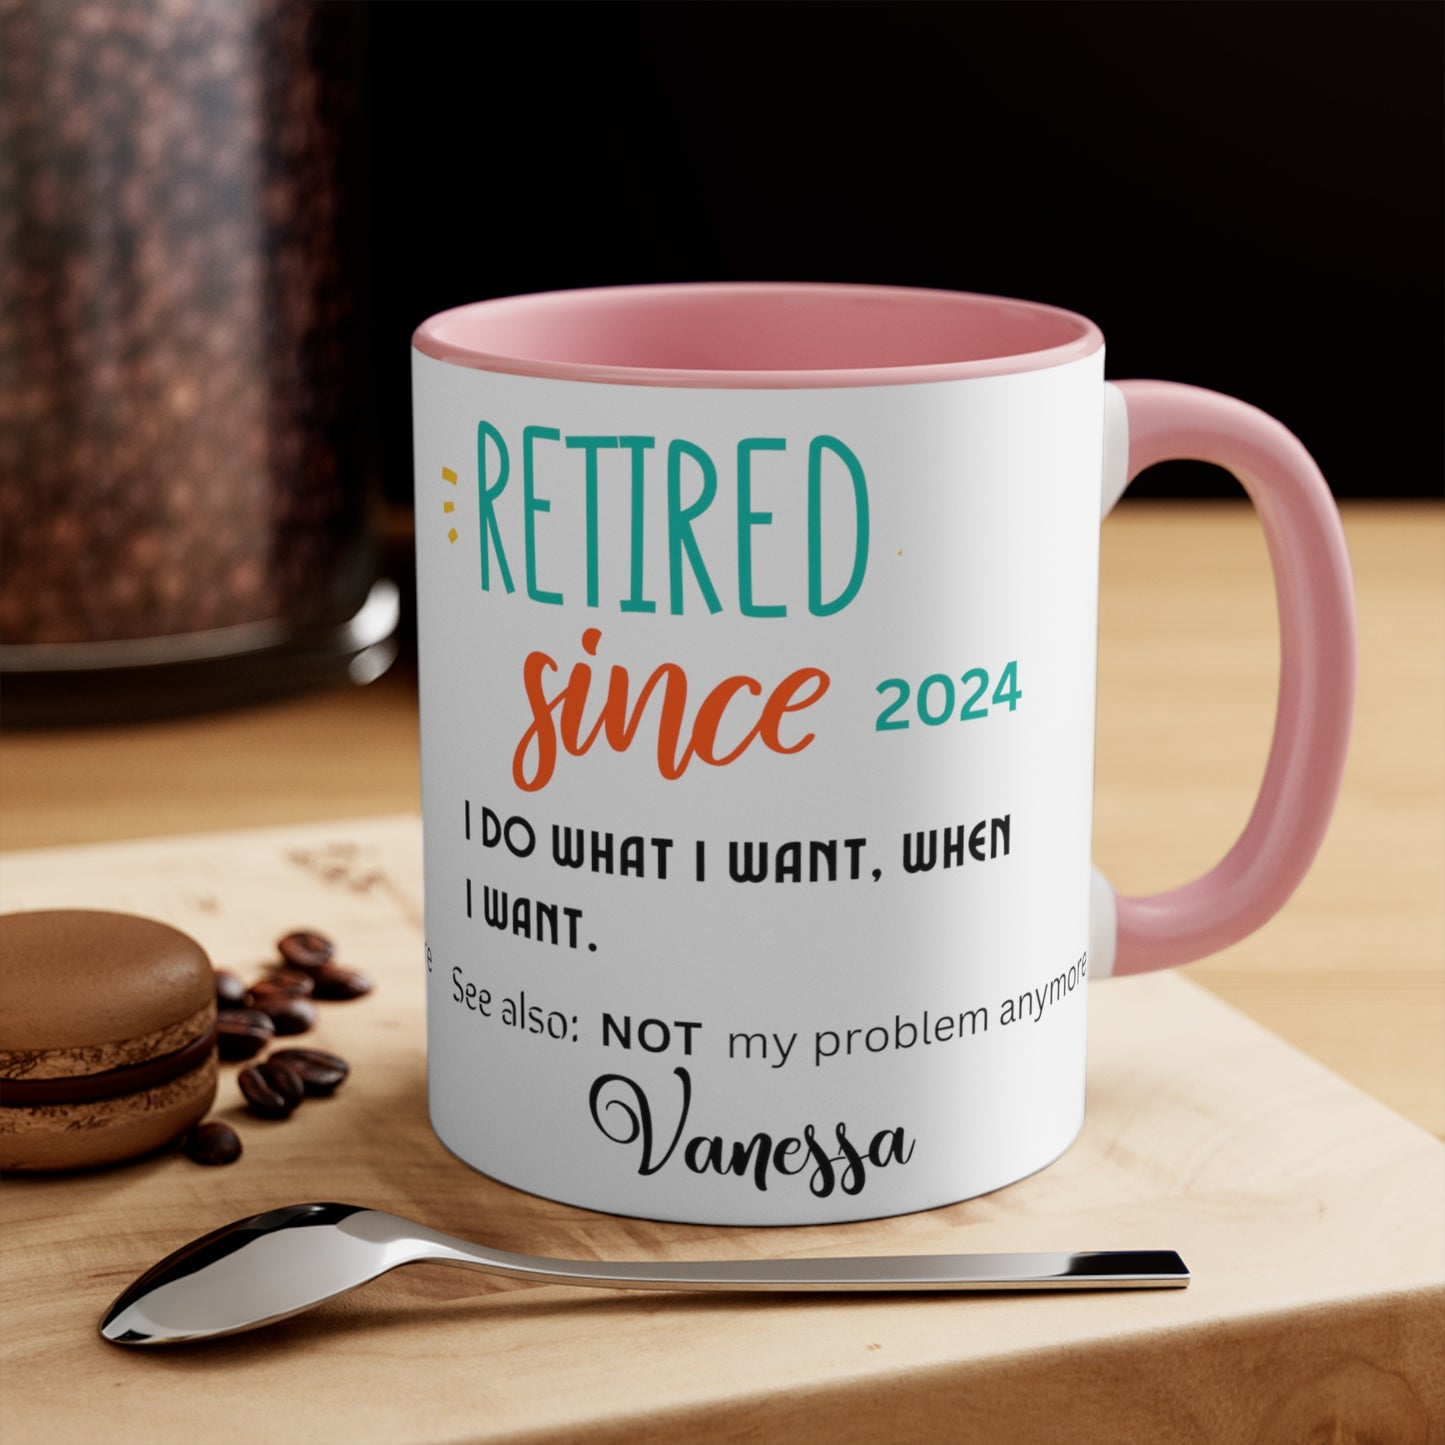 Personalized Retired Coffee Mug, Retirement Coffee Mug Cup, Retirement Mug, Retirement Cup, Retirement Gifts For Women, Gift for Men